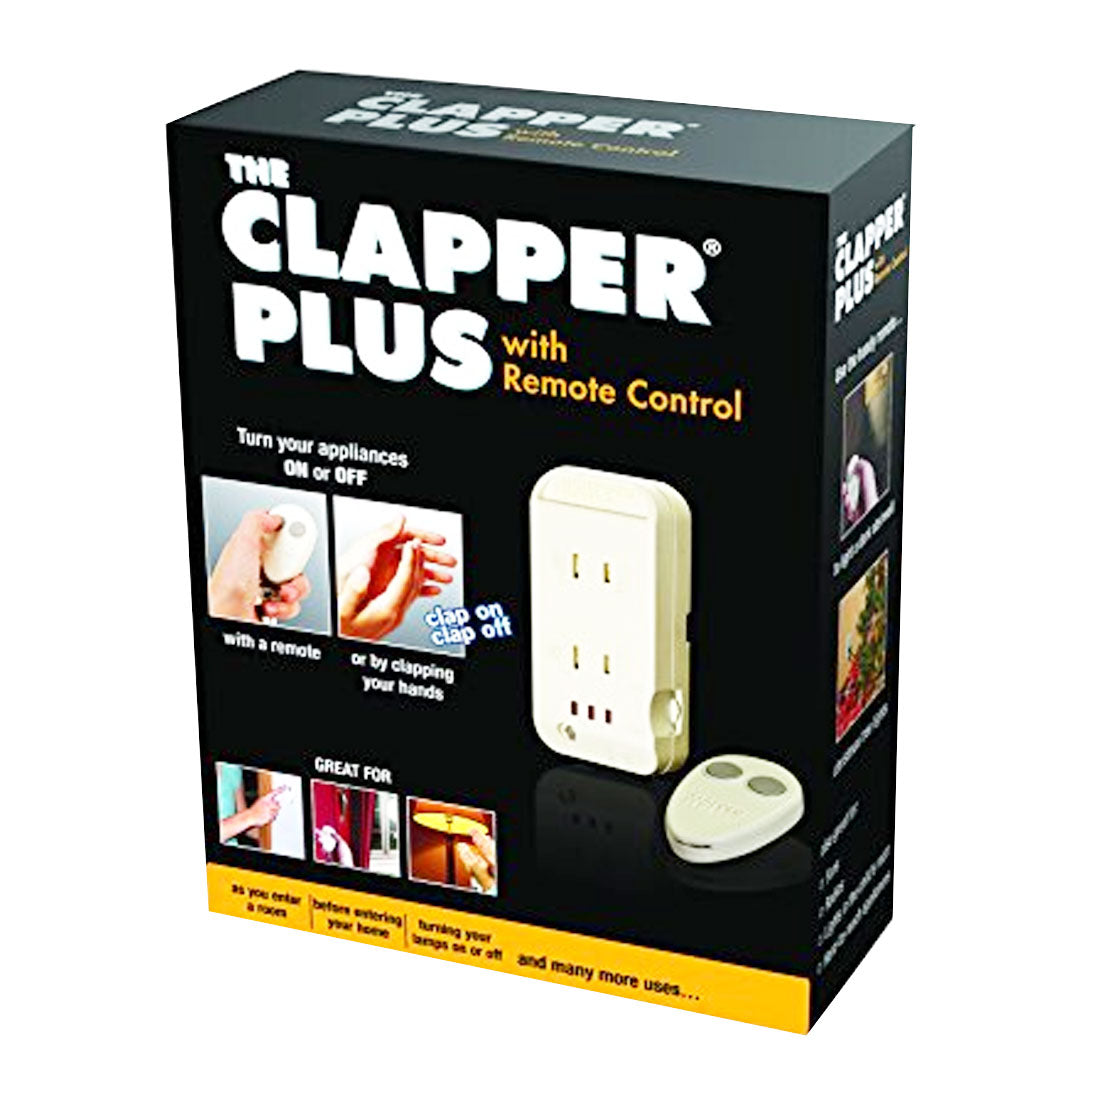 Joseph Enterprise The Clapper Sound Activated with On and Off Switch at